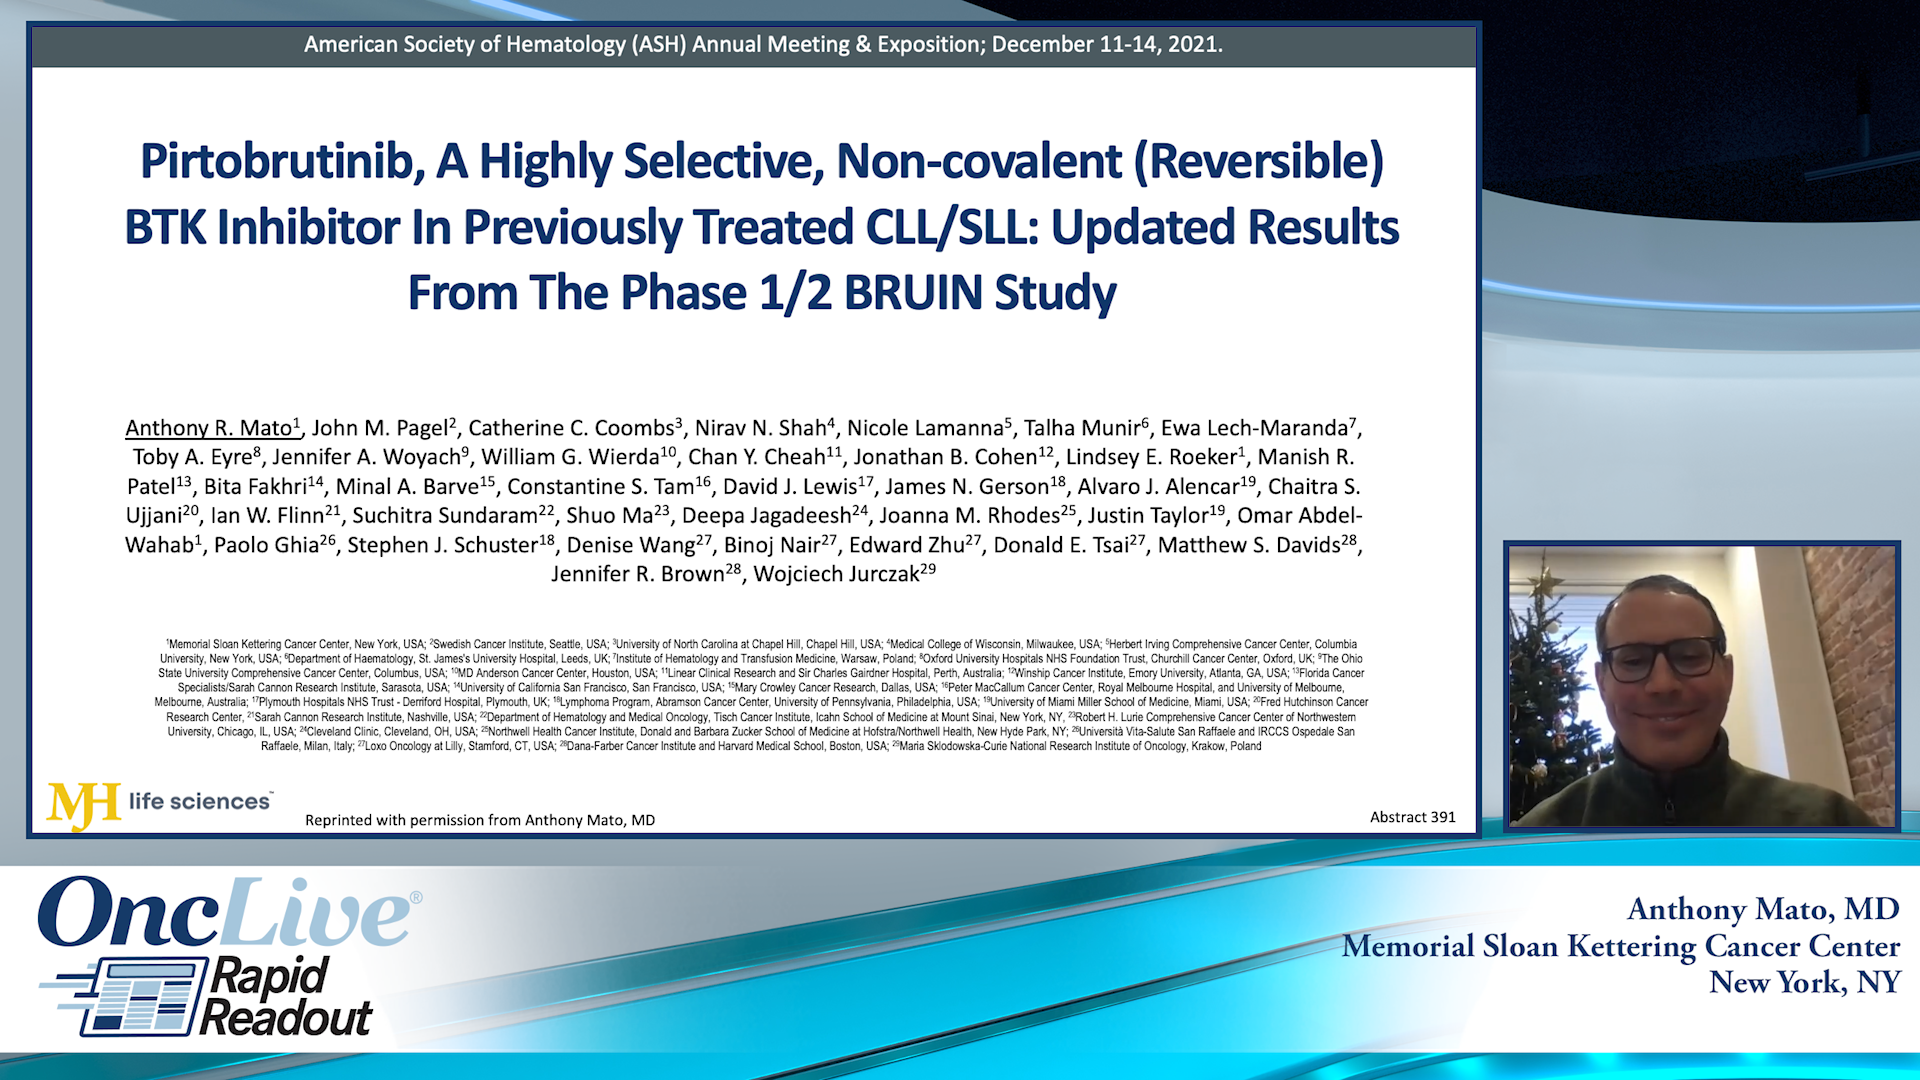 Rapid Readout: Pirtobrutinib, A Highly Selective, Noncovalent (Reversible) BTK Inhibitor In Previously Treated CLL/SLL: Updated Results From The Phase 1/2 BRUIN Study